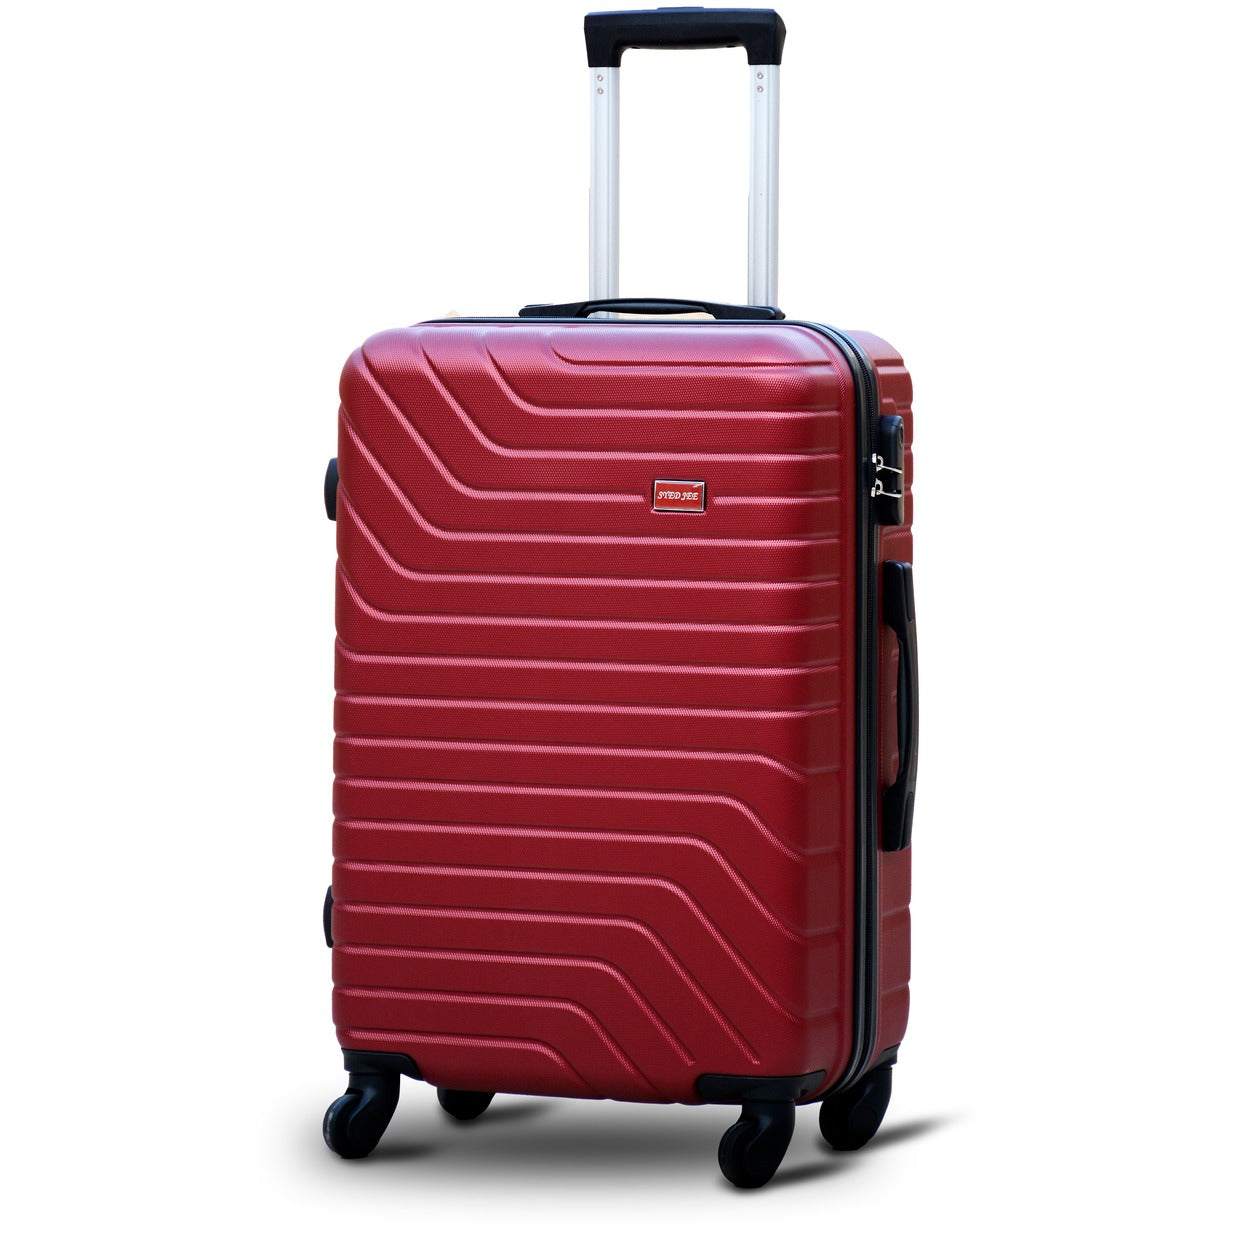 28" Red Colour SJ ABS Luggage Lightweight Hard Case Trolley Bag